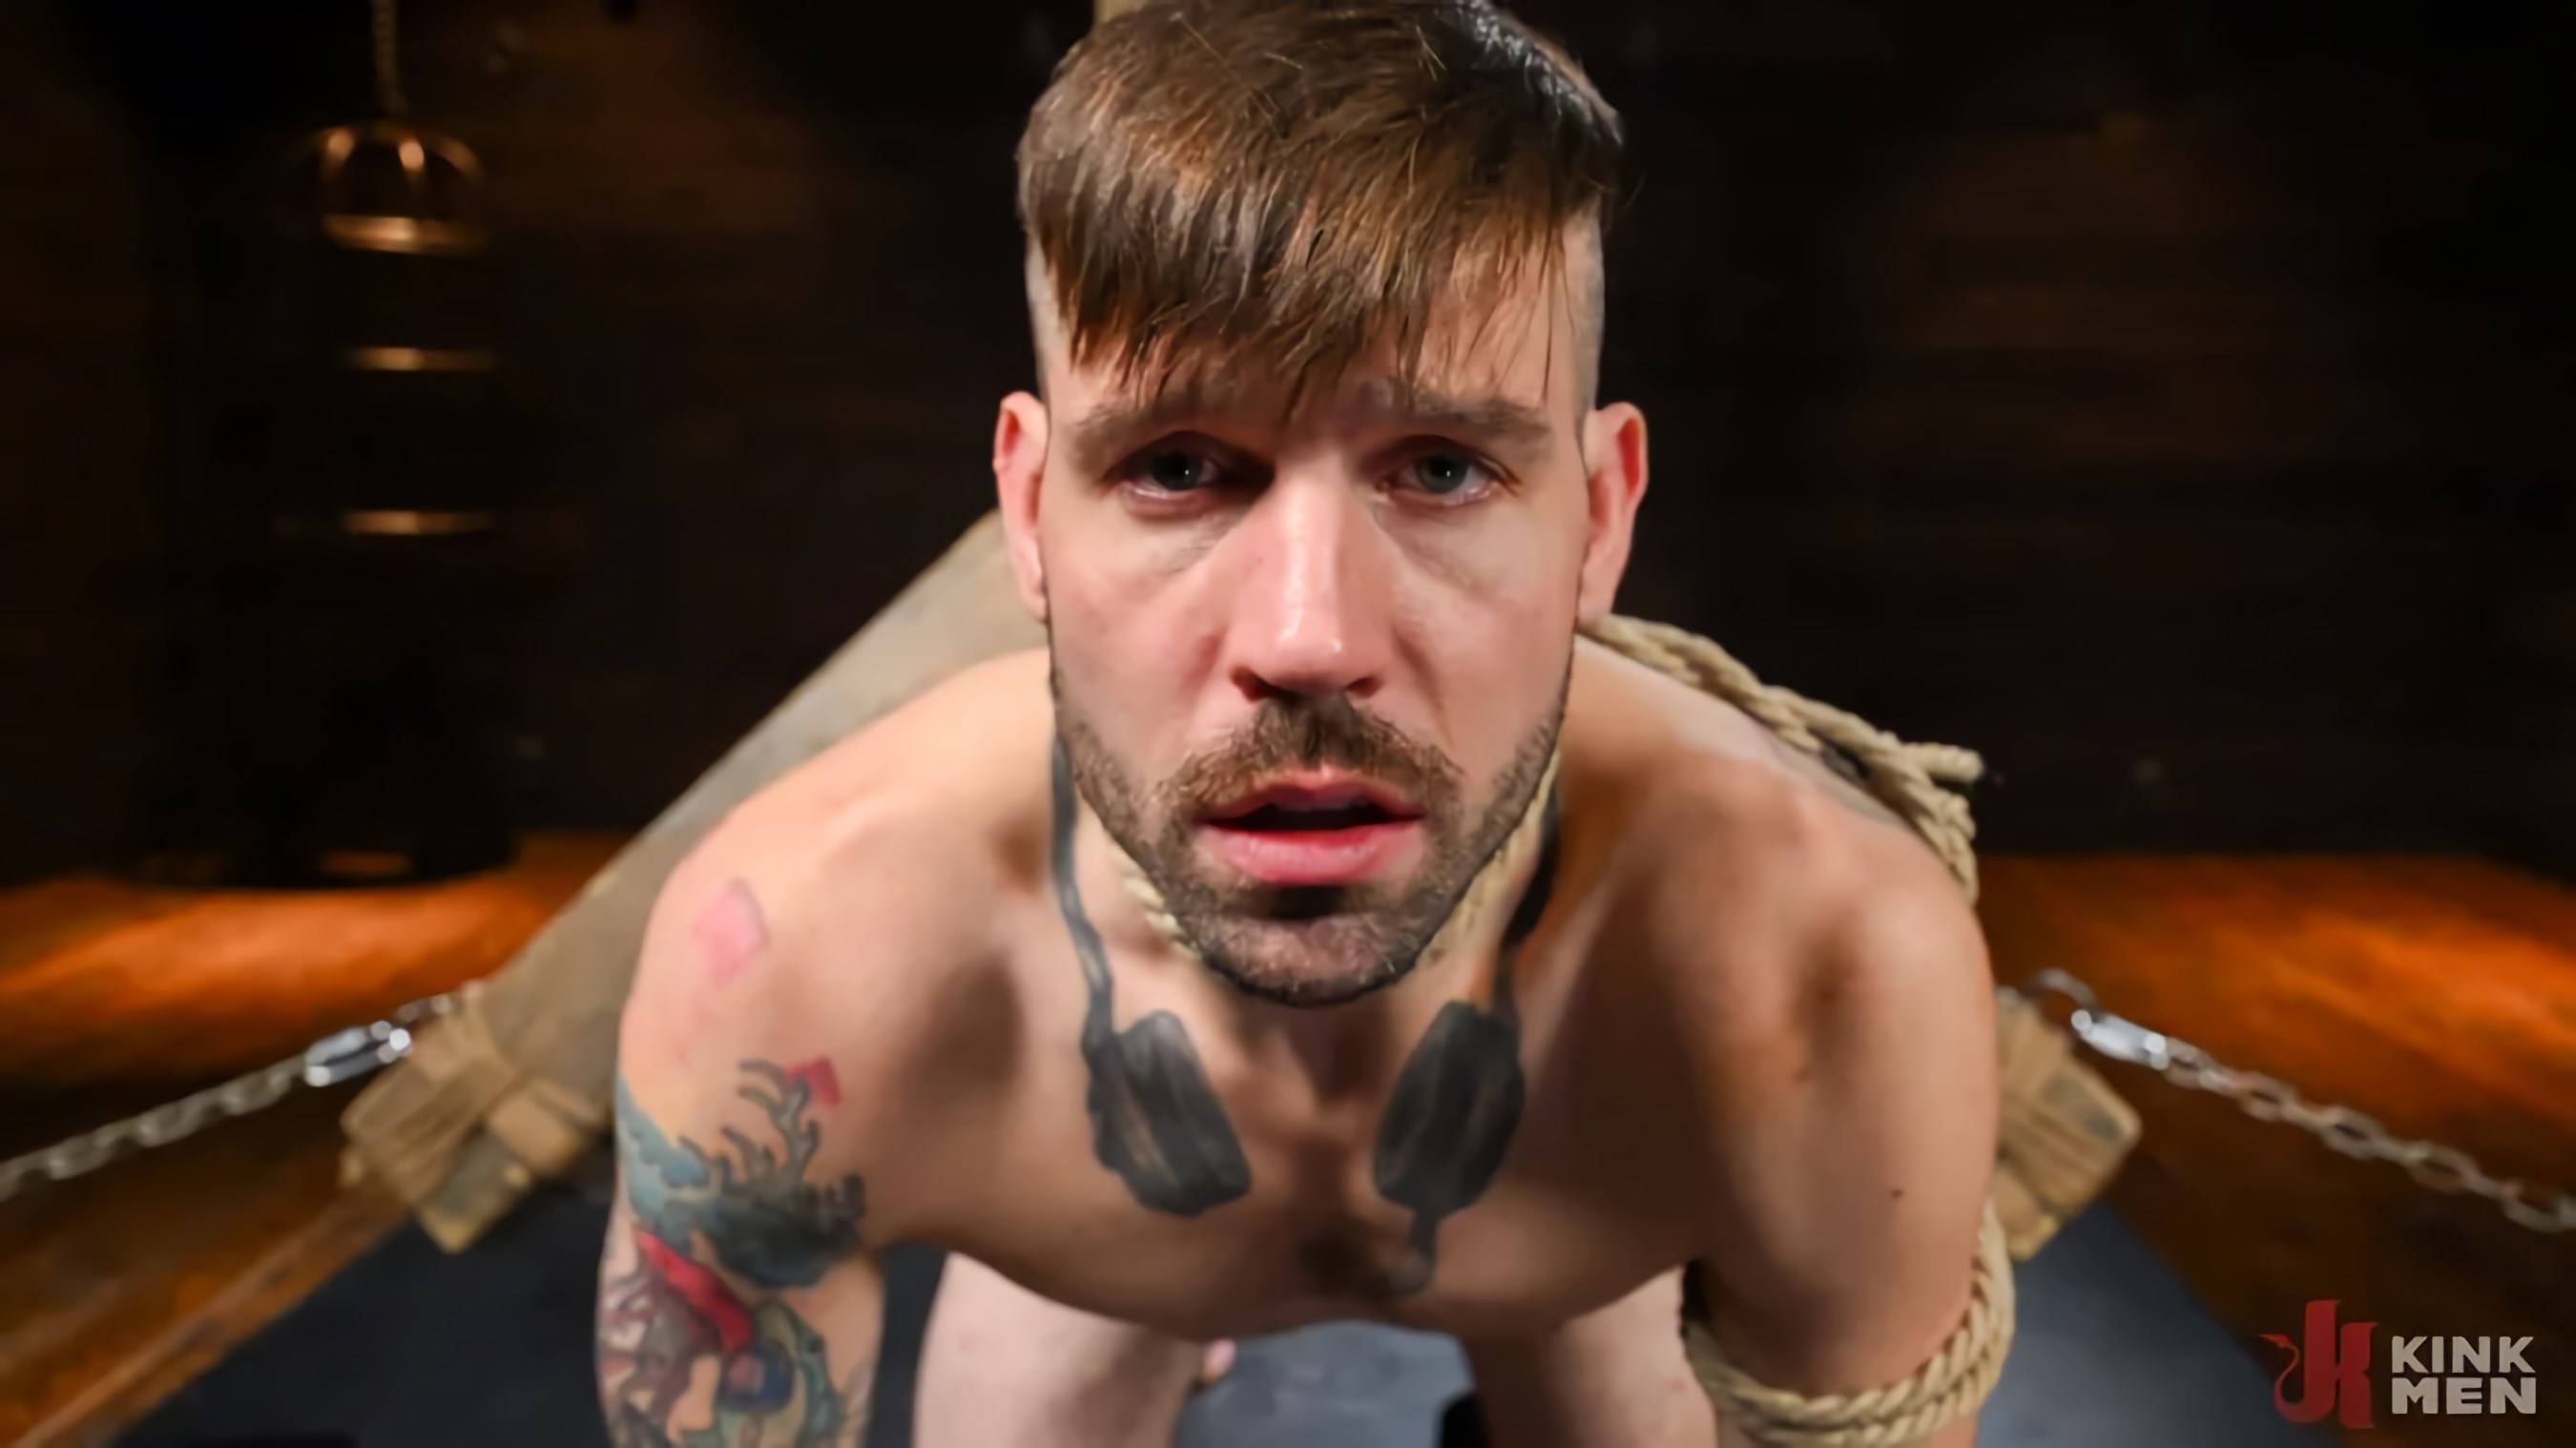 Kink Men 'TURTLE BOY: Buck Richards is fucked, flogged and bound in a metal cage and renamed Turtle Boy by Vander Pulaski' starring Vander Pulaski (Photo 2)